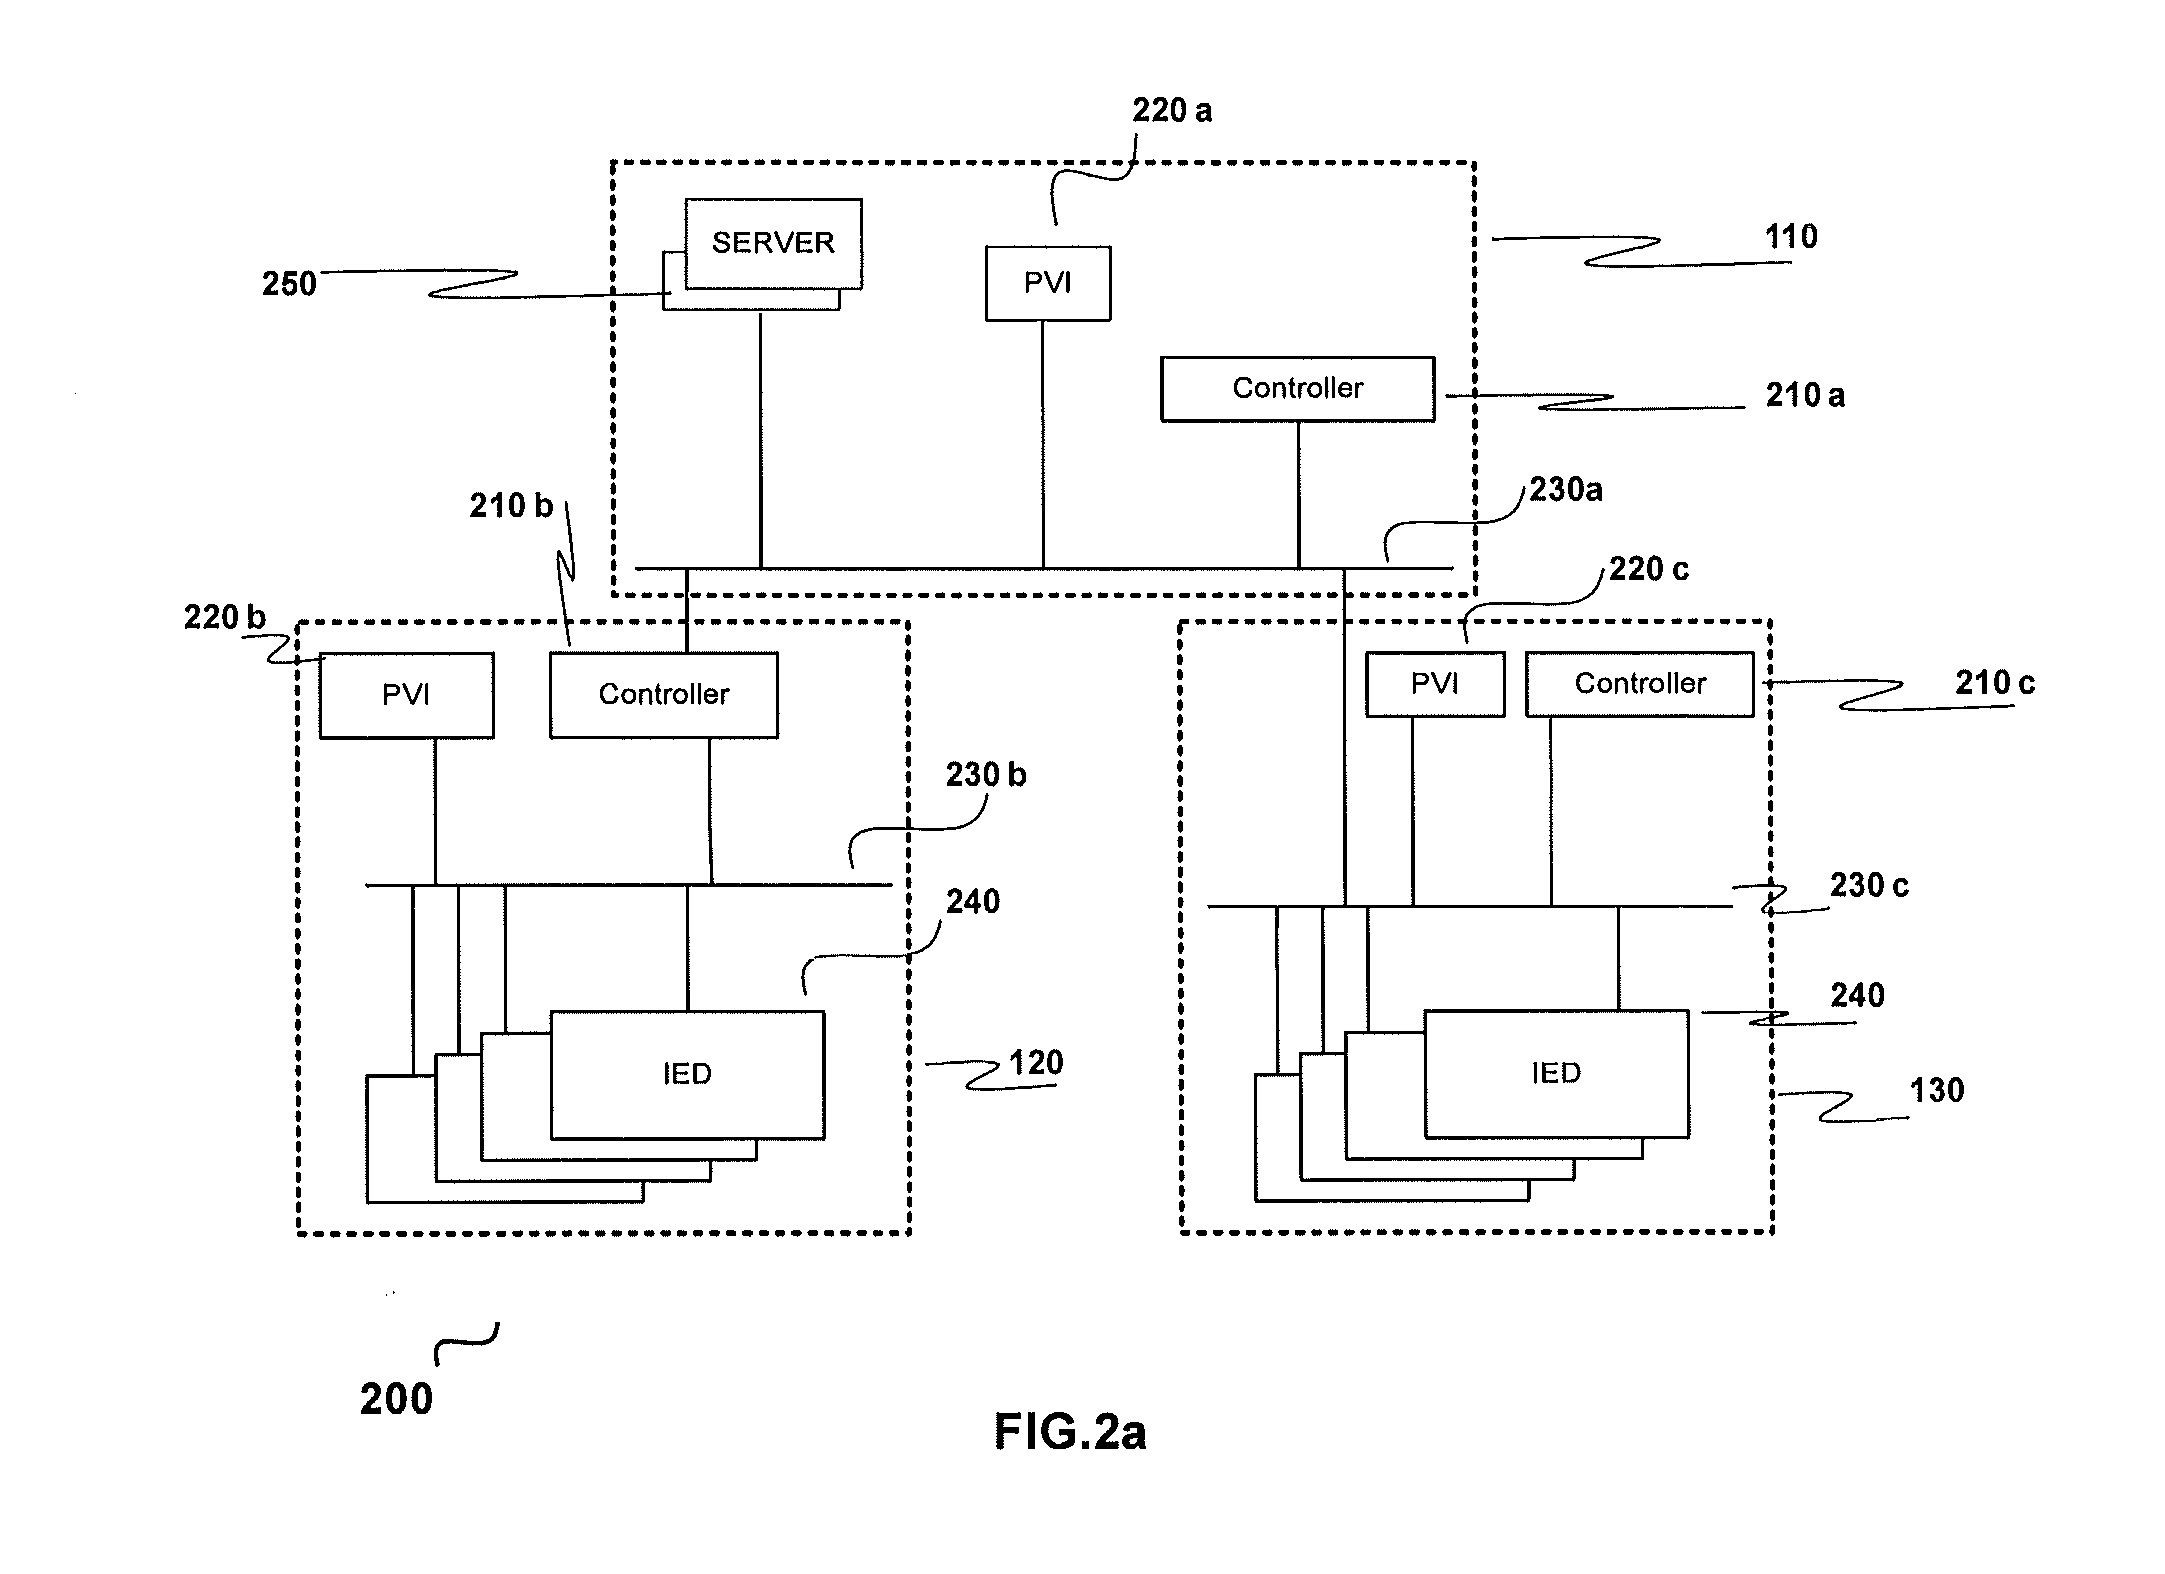 Method and system for power management